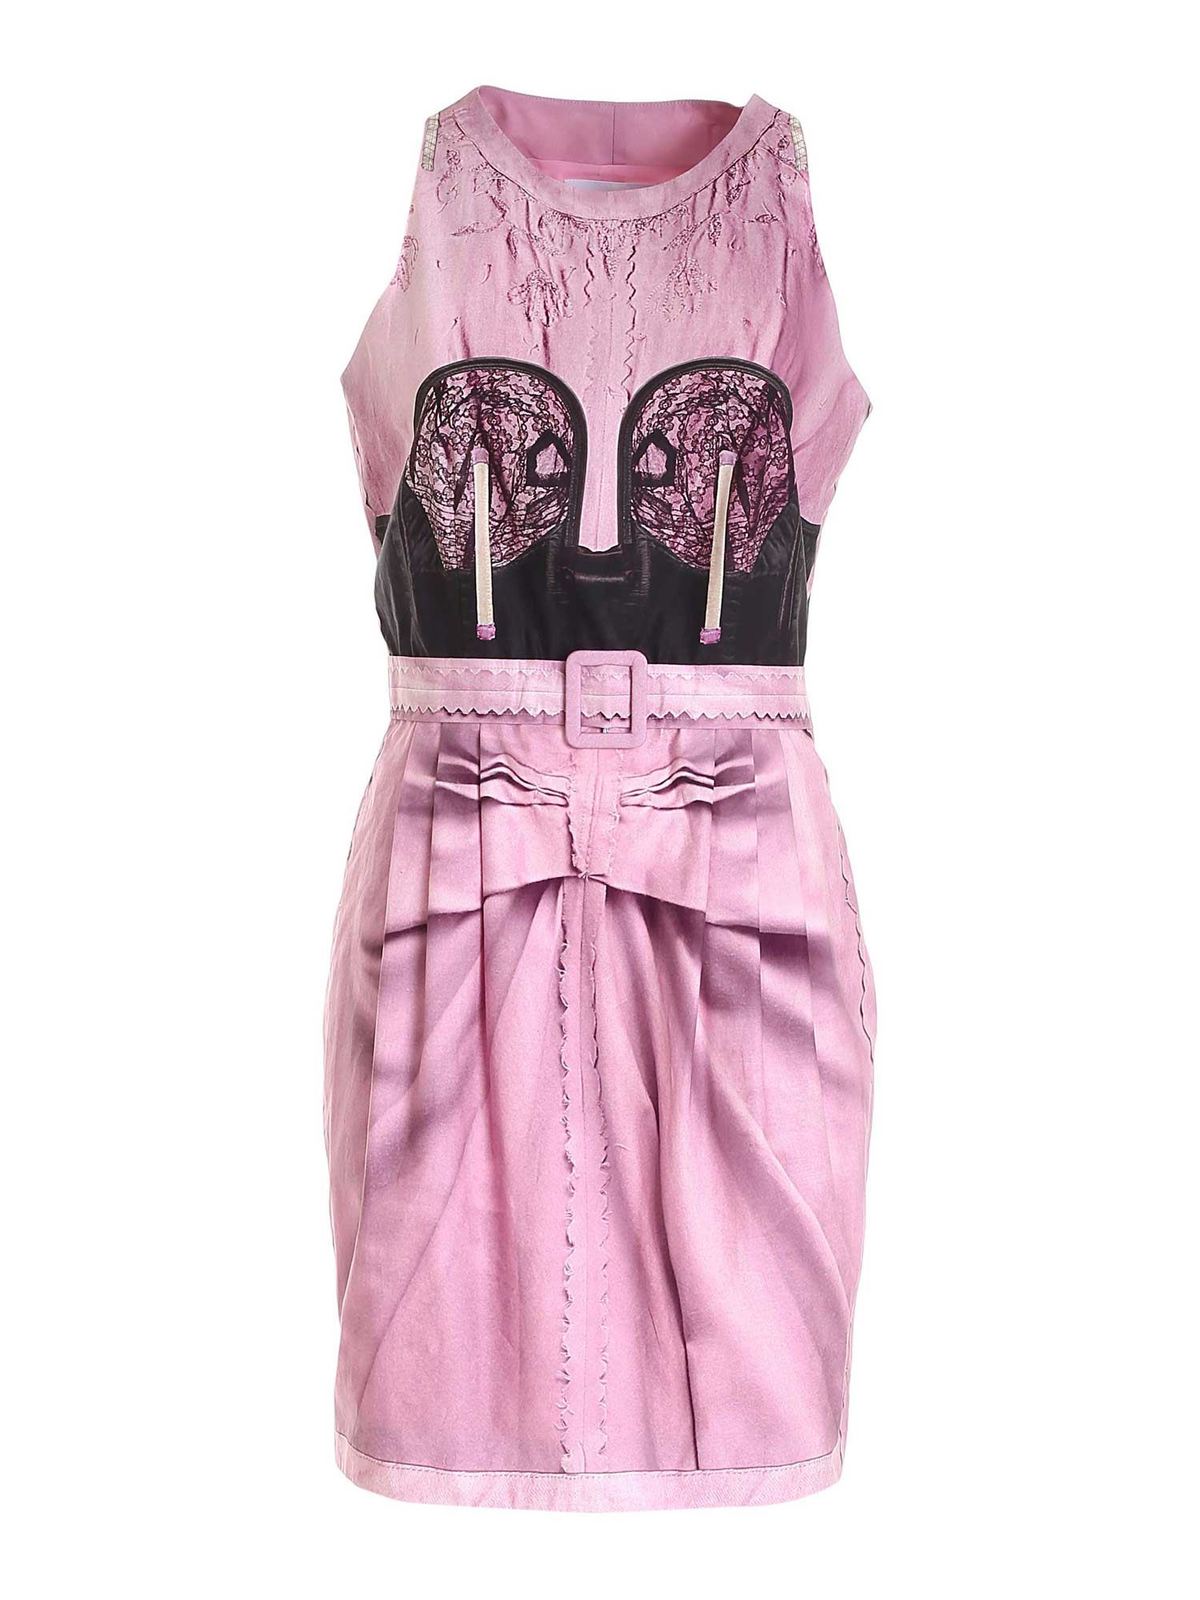 MOSCHINO INSIDE OUT EFFETTO TROMPE-LŒIL DRESS IN PINK